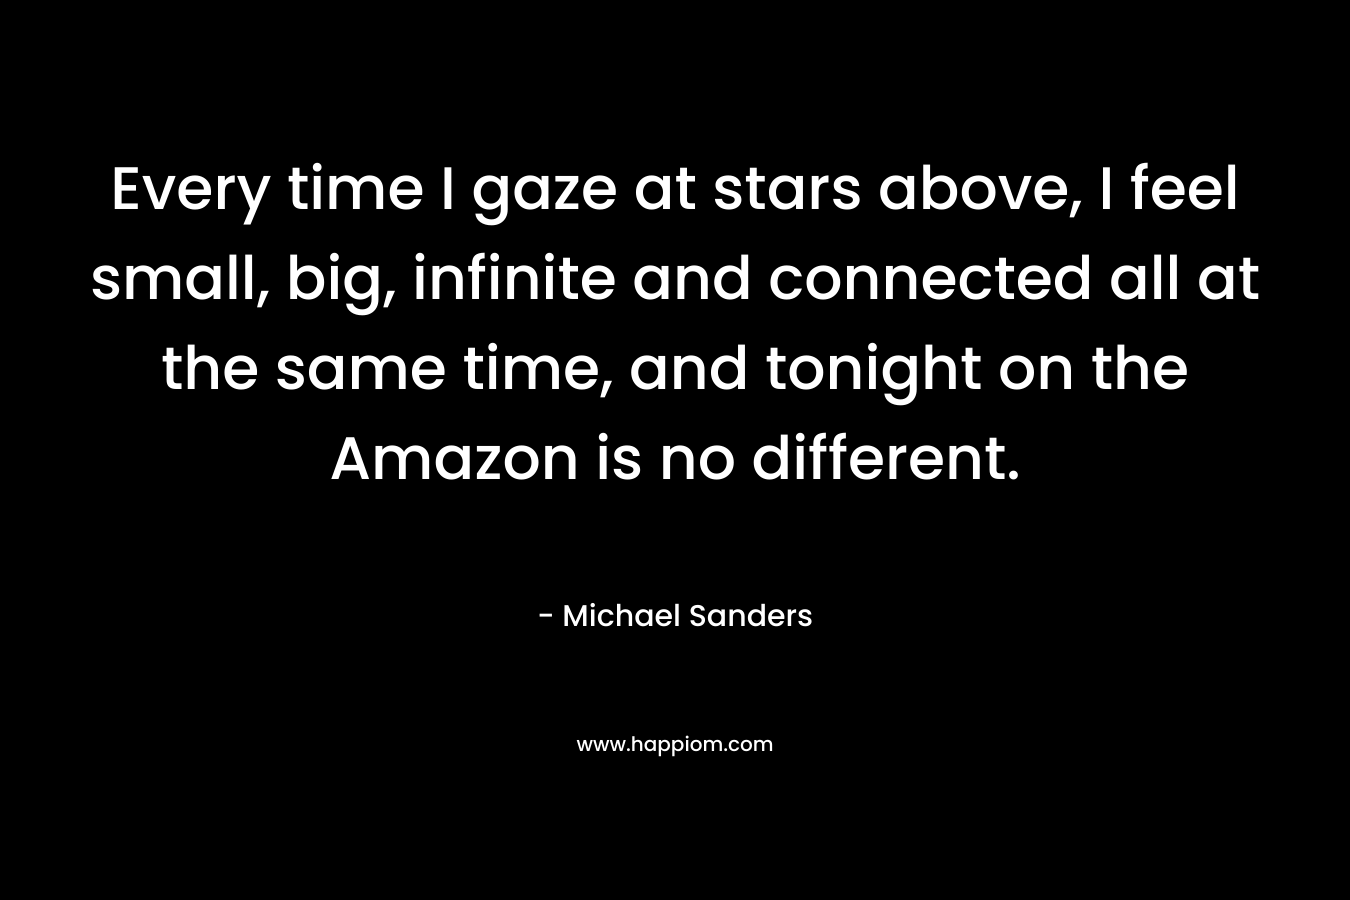 Every time I gaze at stars above, I feel small, big, infinite and connected all at the same time, and tonight on the Amazon is no different. – Michael  Sanders